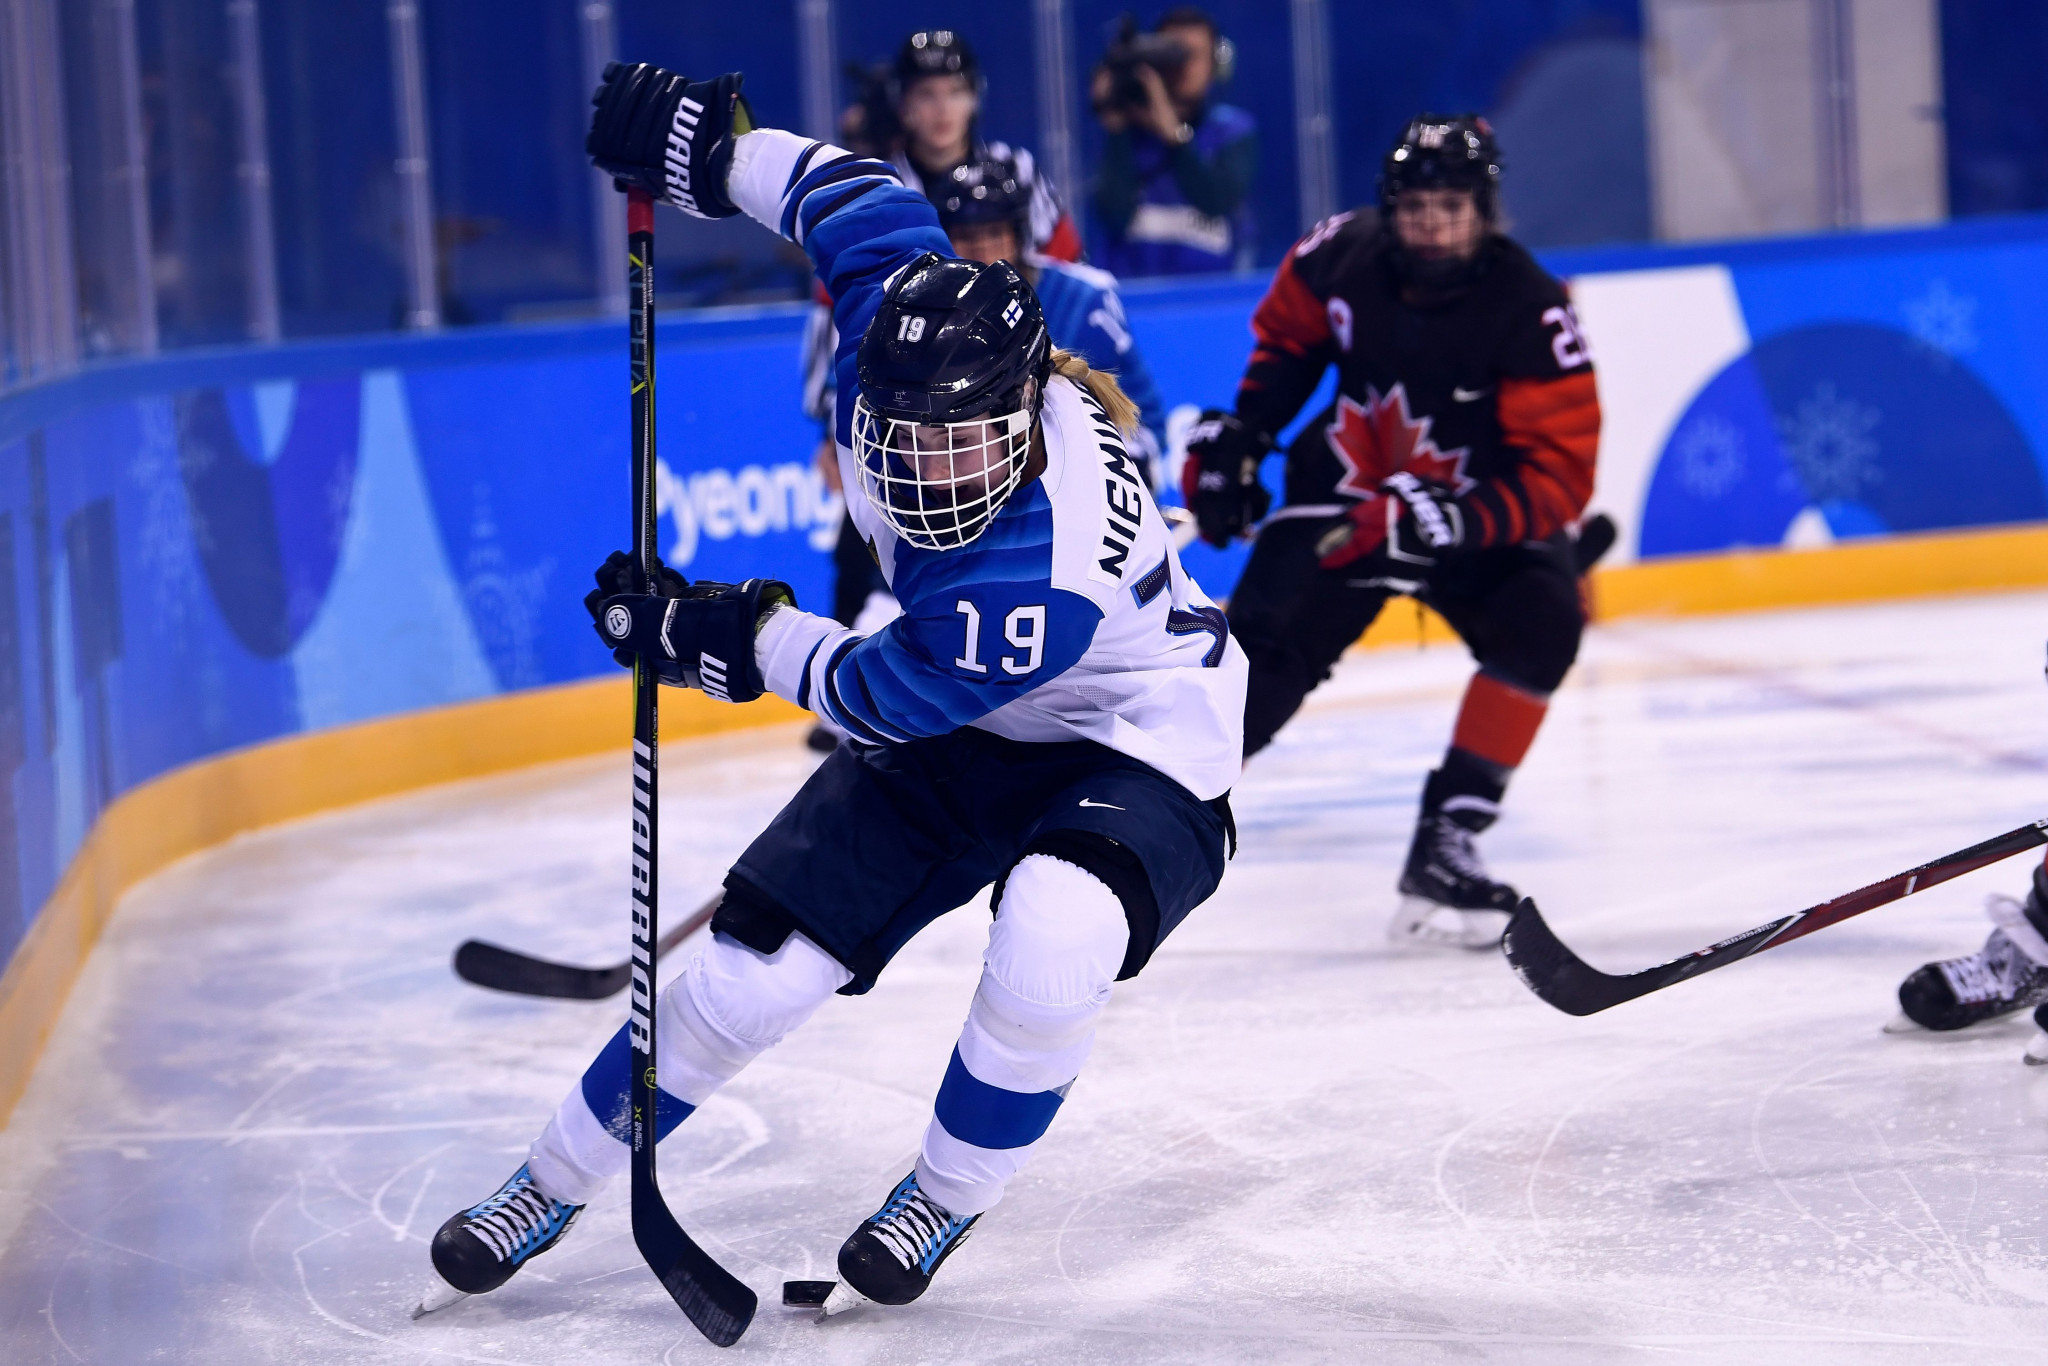 Petra Nieminen of Finland grabbed the IIHF Women's World Championship's first natural hat-trick since 2013 ©Getty Images